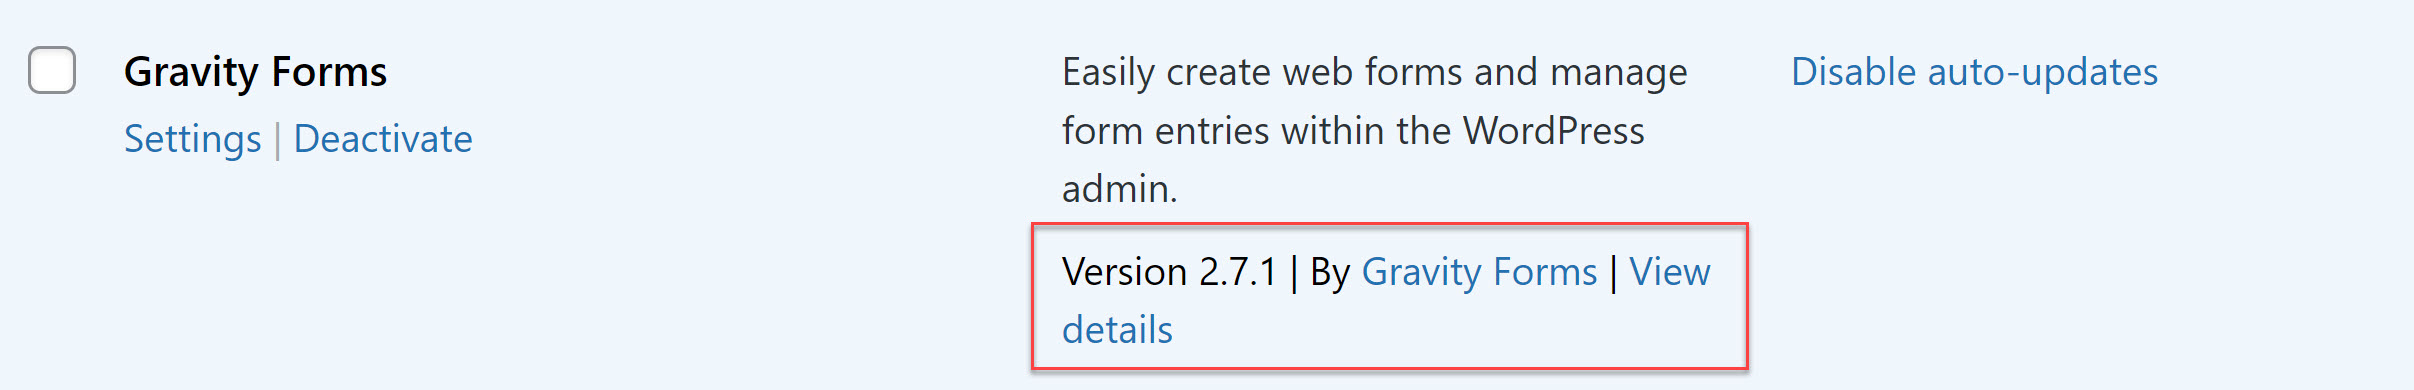 Gravity Forms 2.7.1